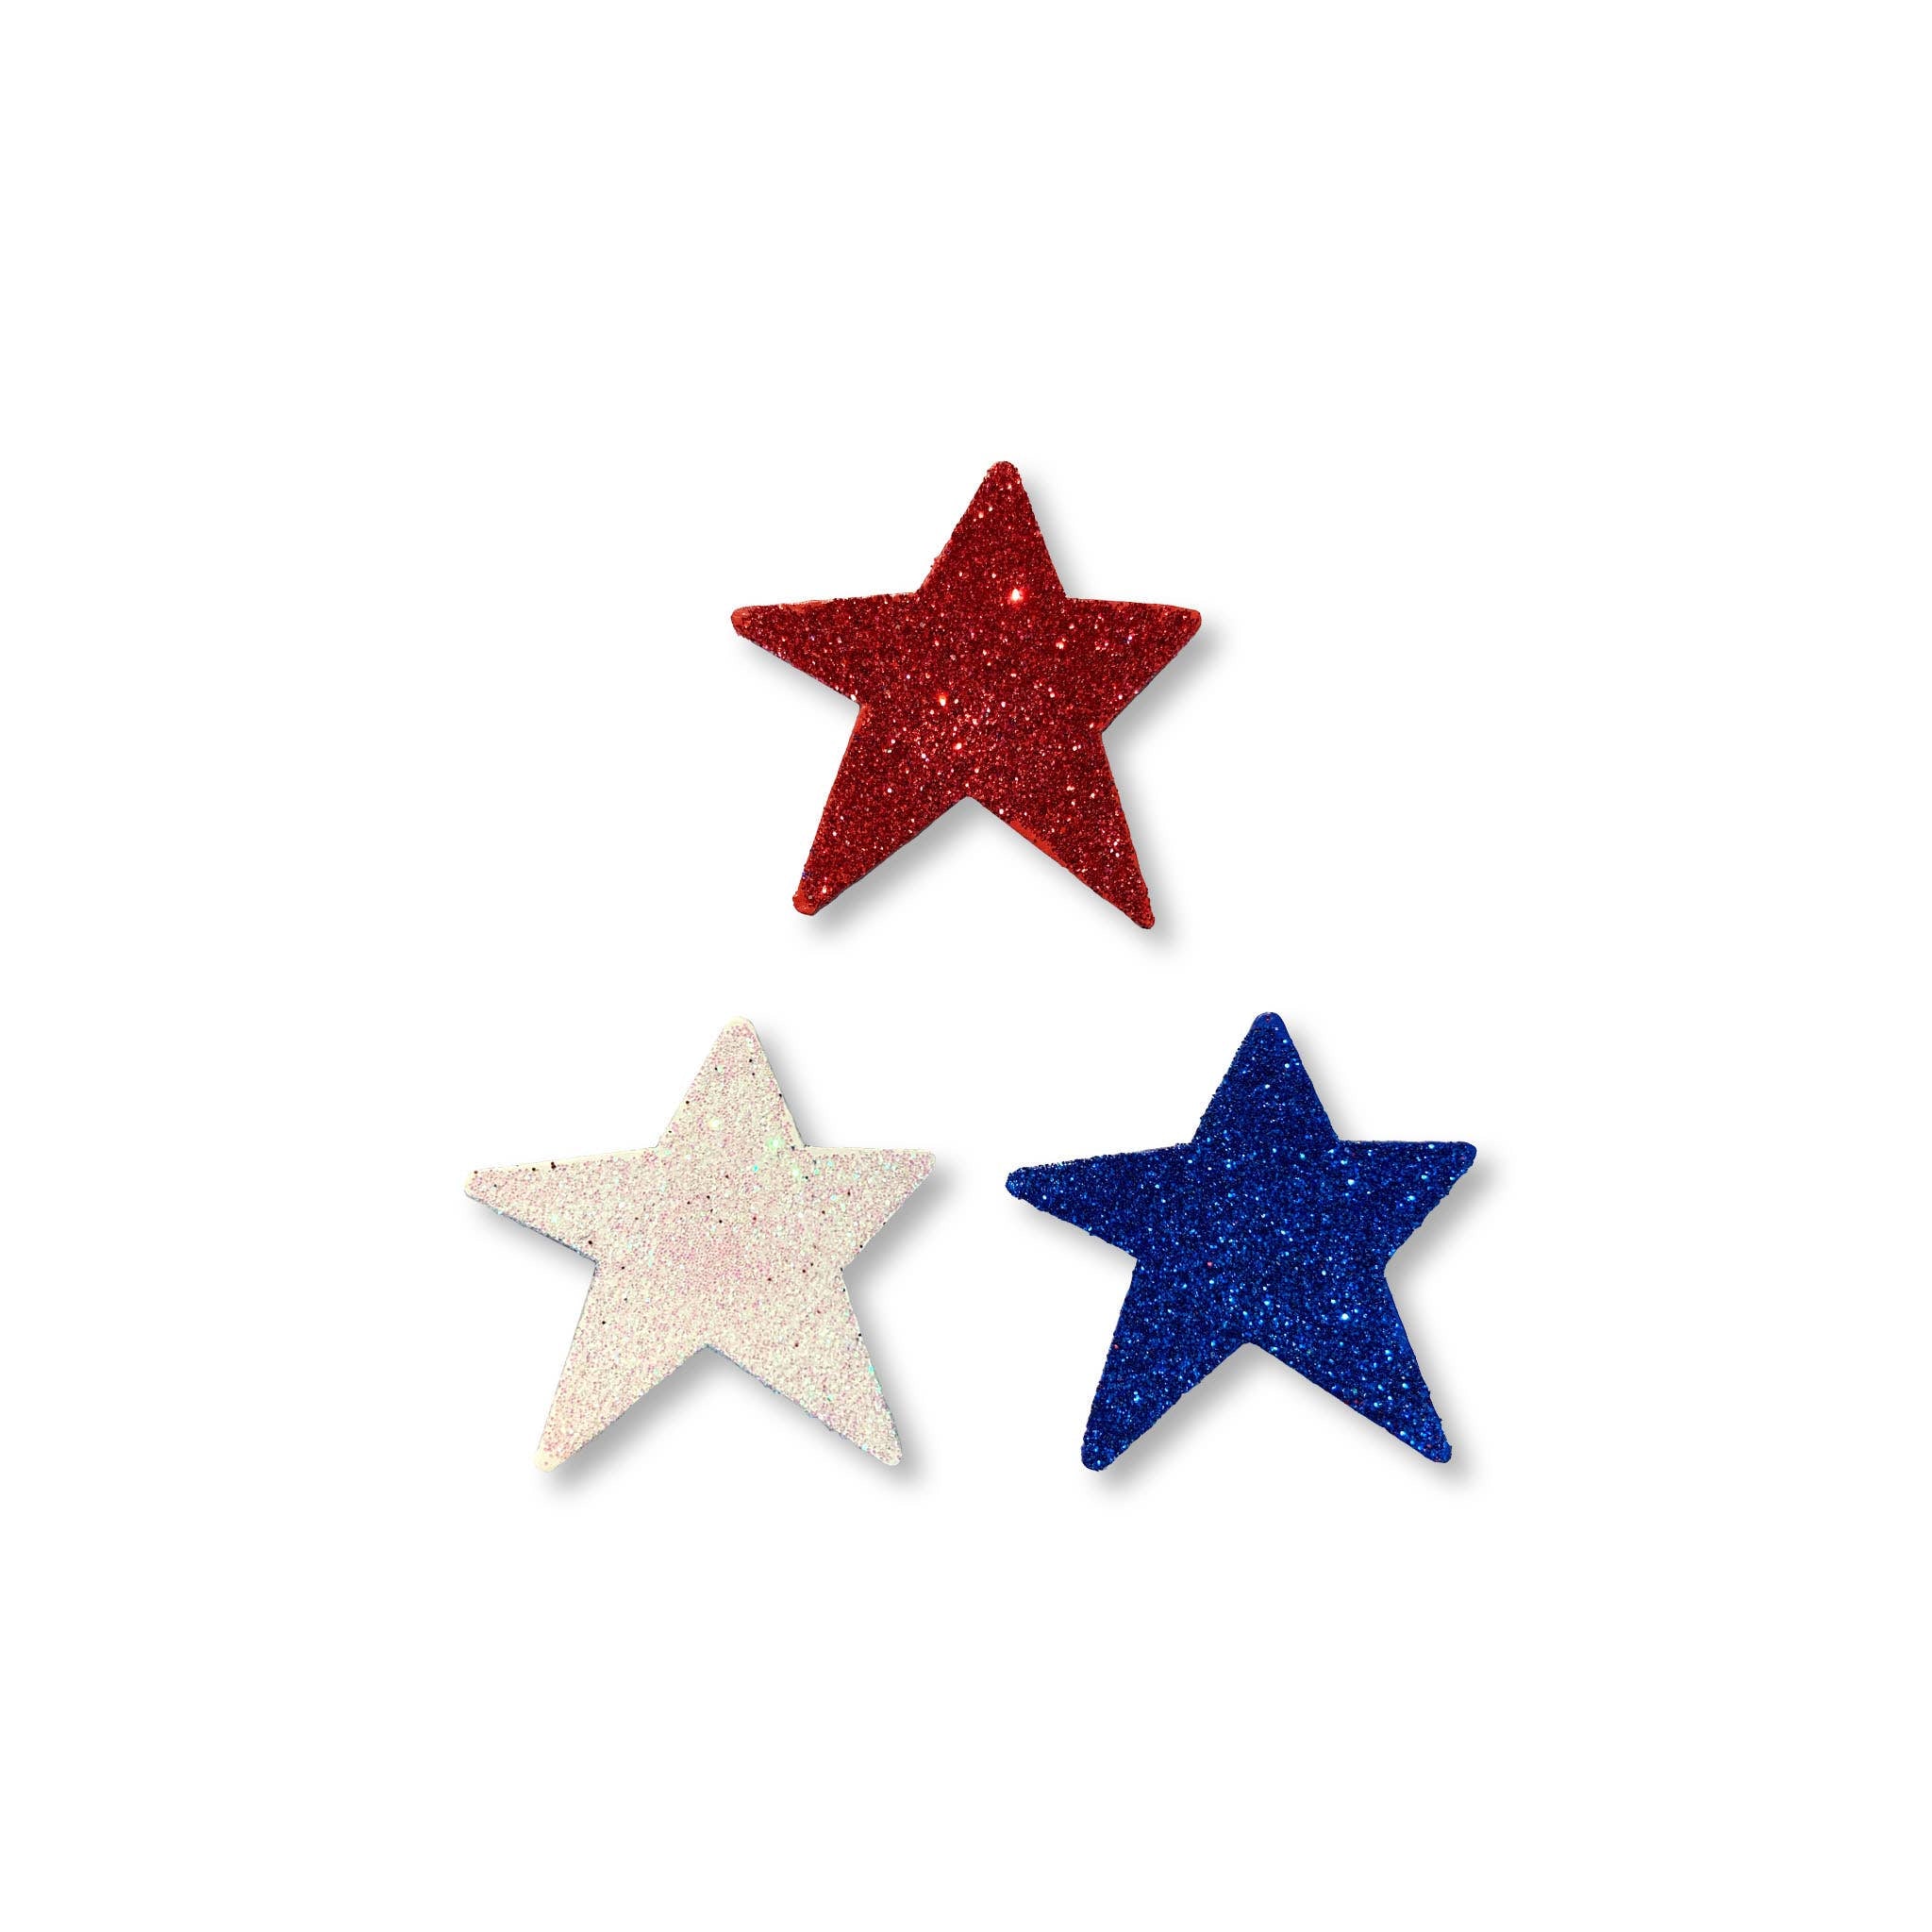 Star Patriotic Glitter Magnets S/3, 4th of July Decor